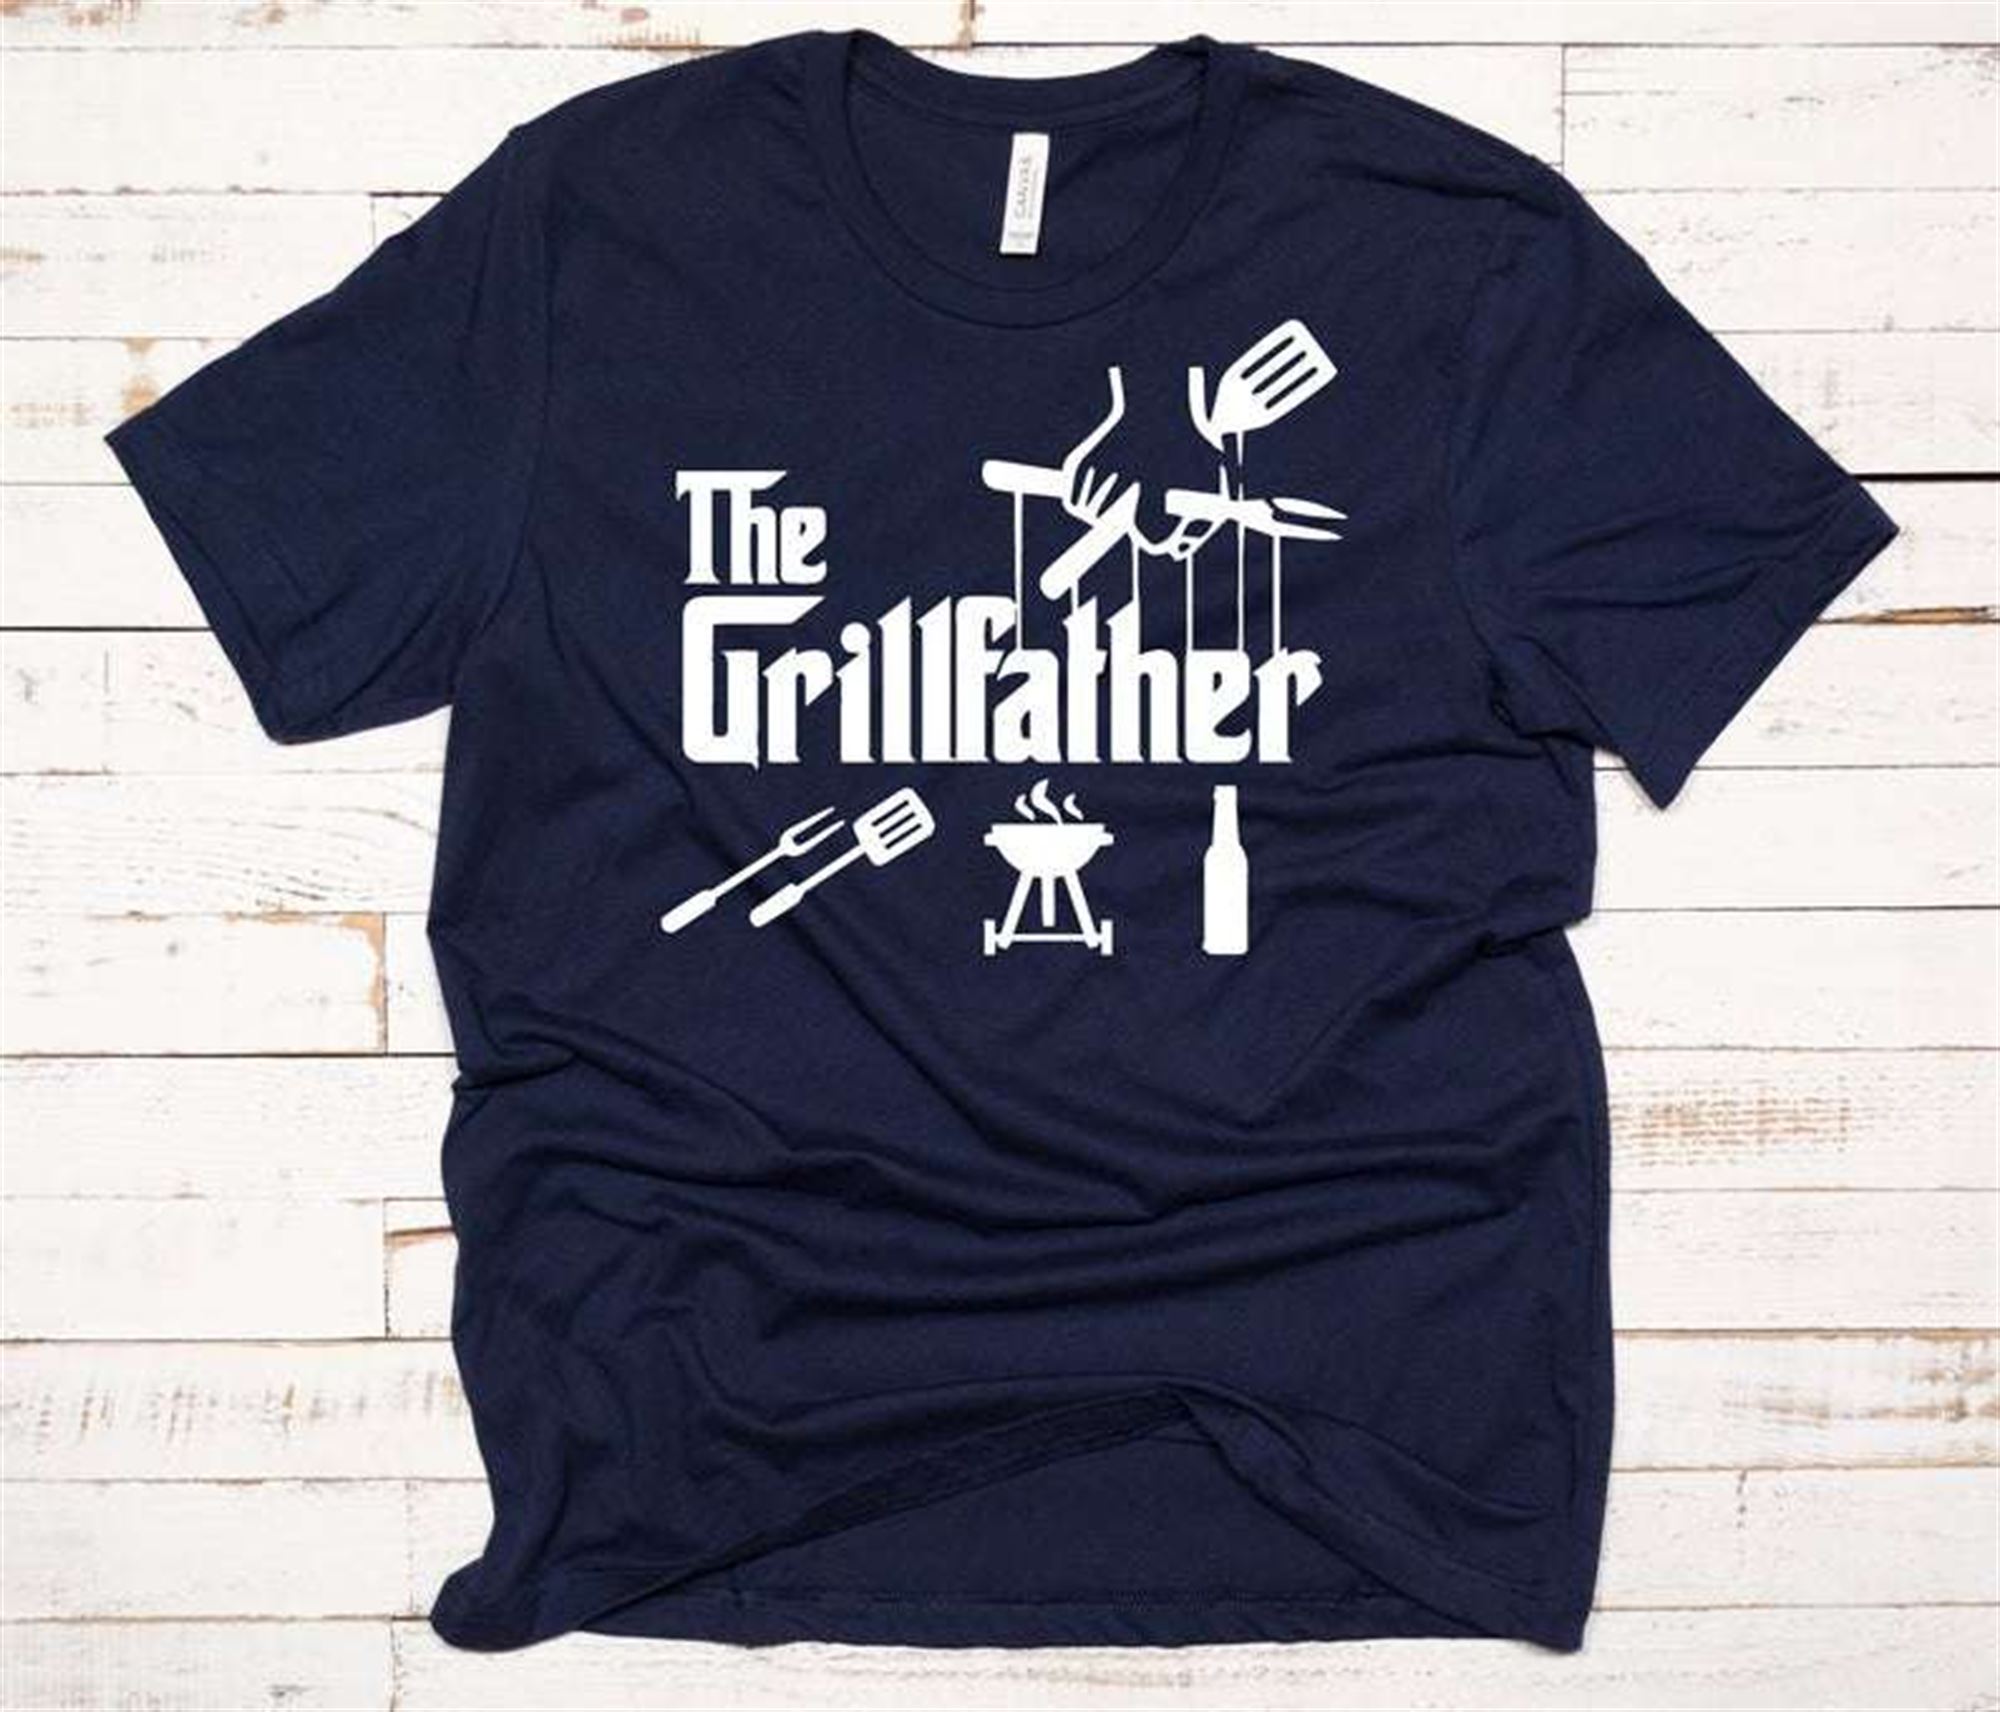 The Grill Father Unisex T Shirt Size Up To 5xl